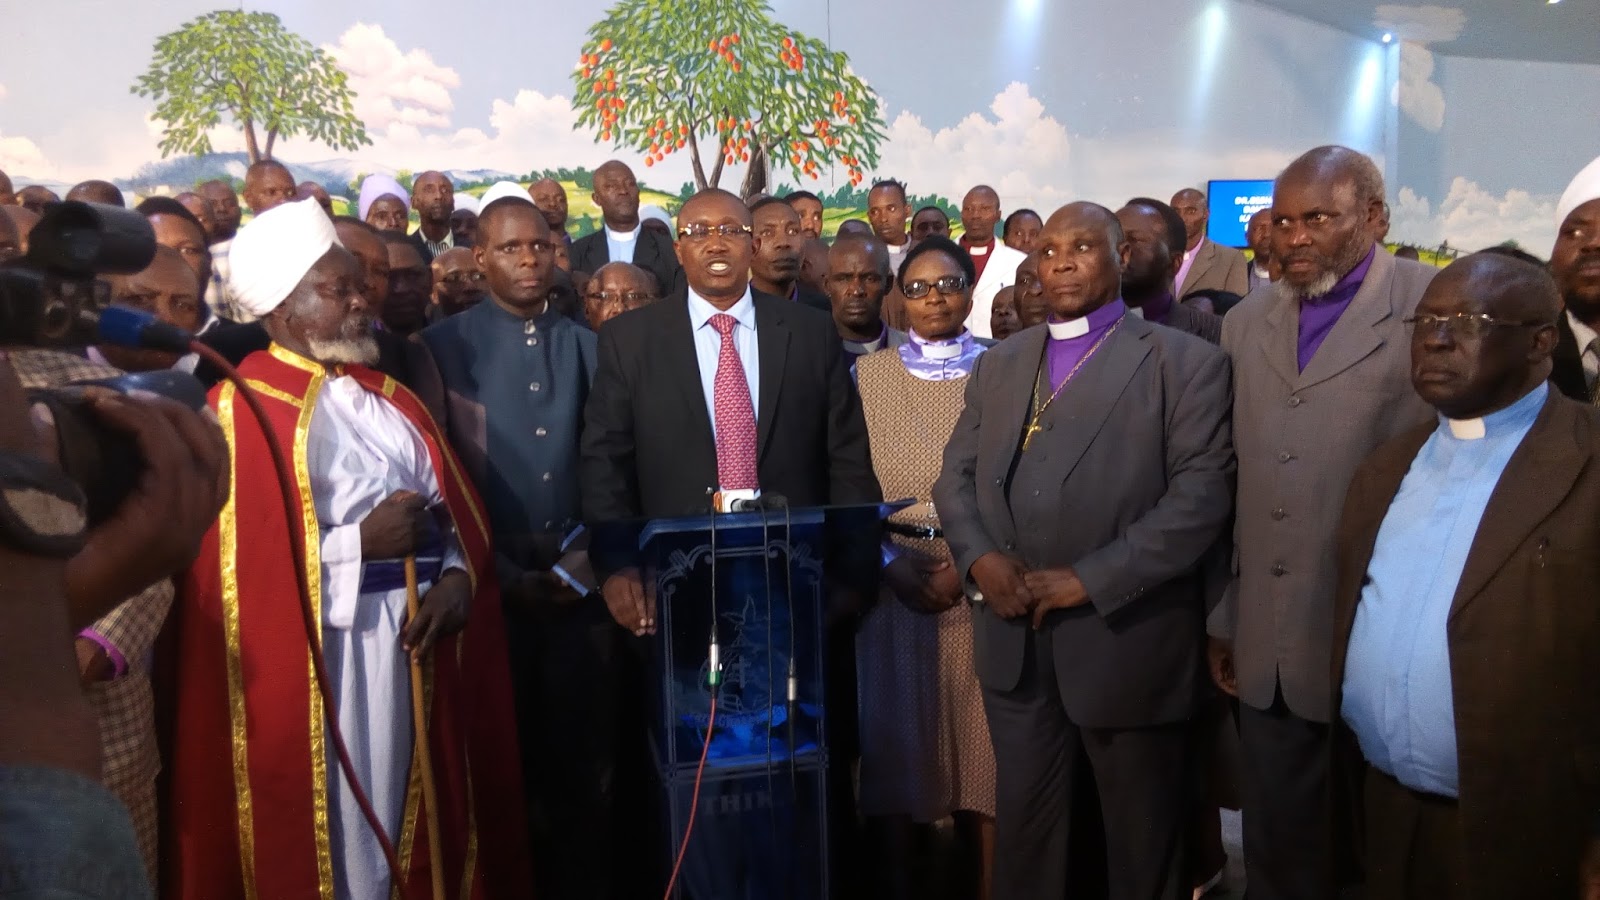 Clergy set 20 days of prayer, fasting as Kenya gears up for polls. | Thika Town Today